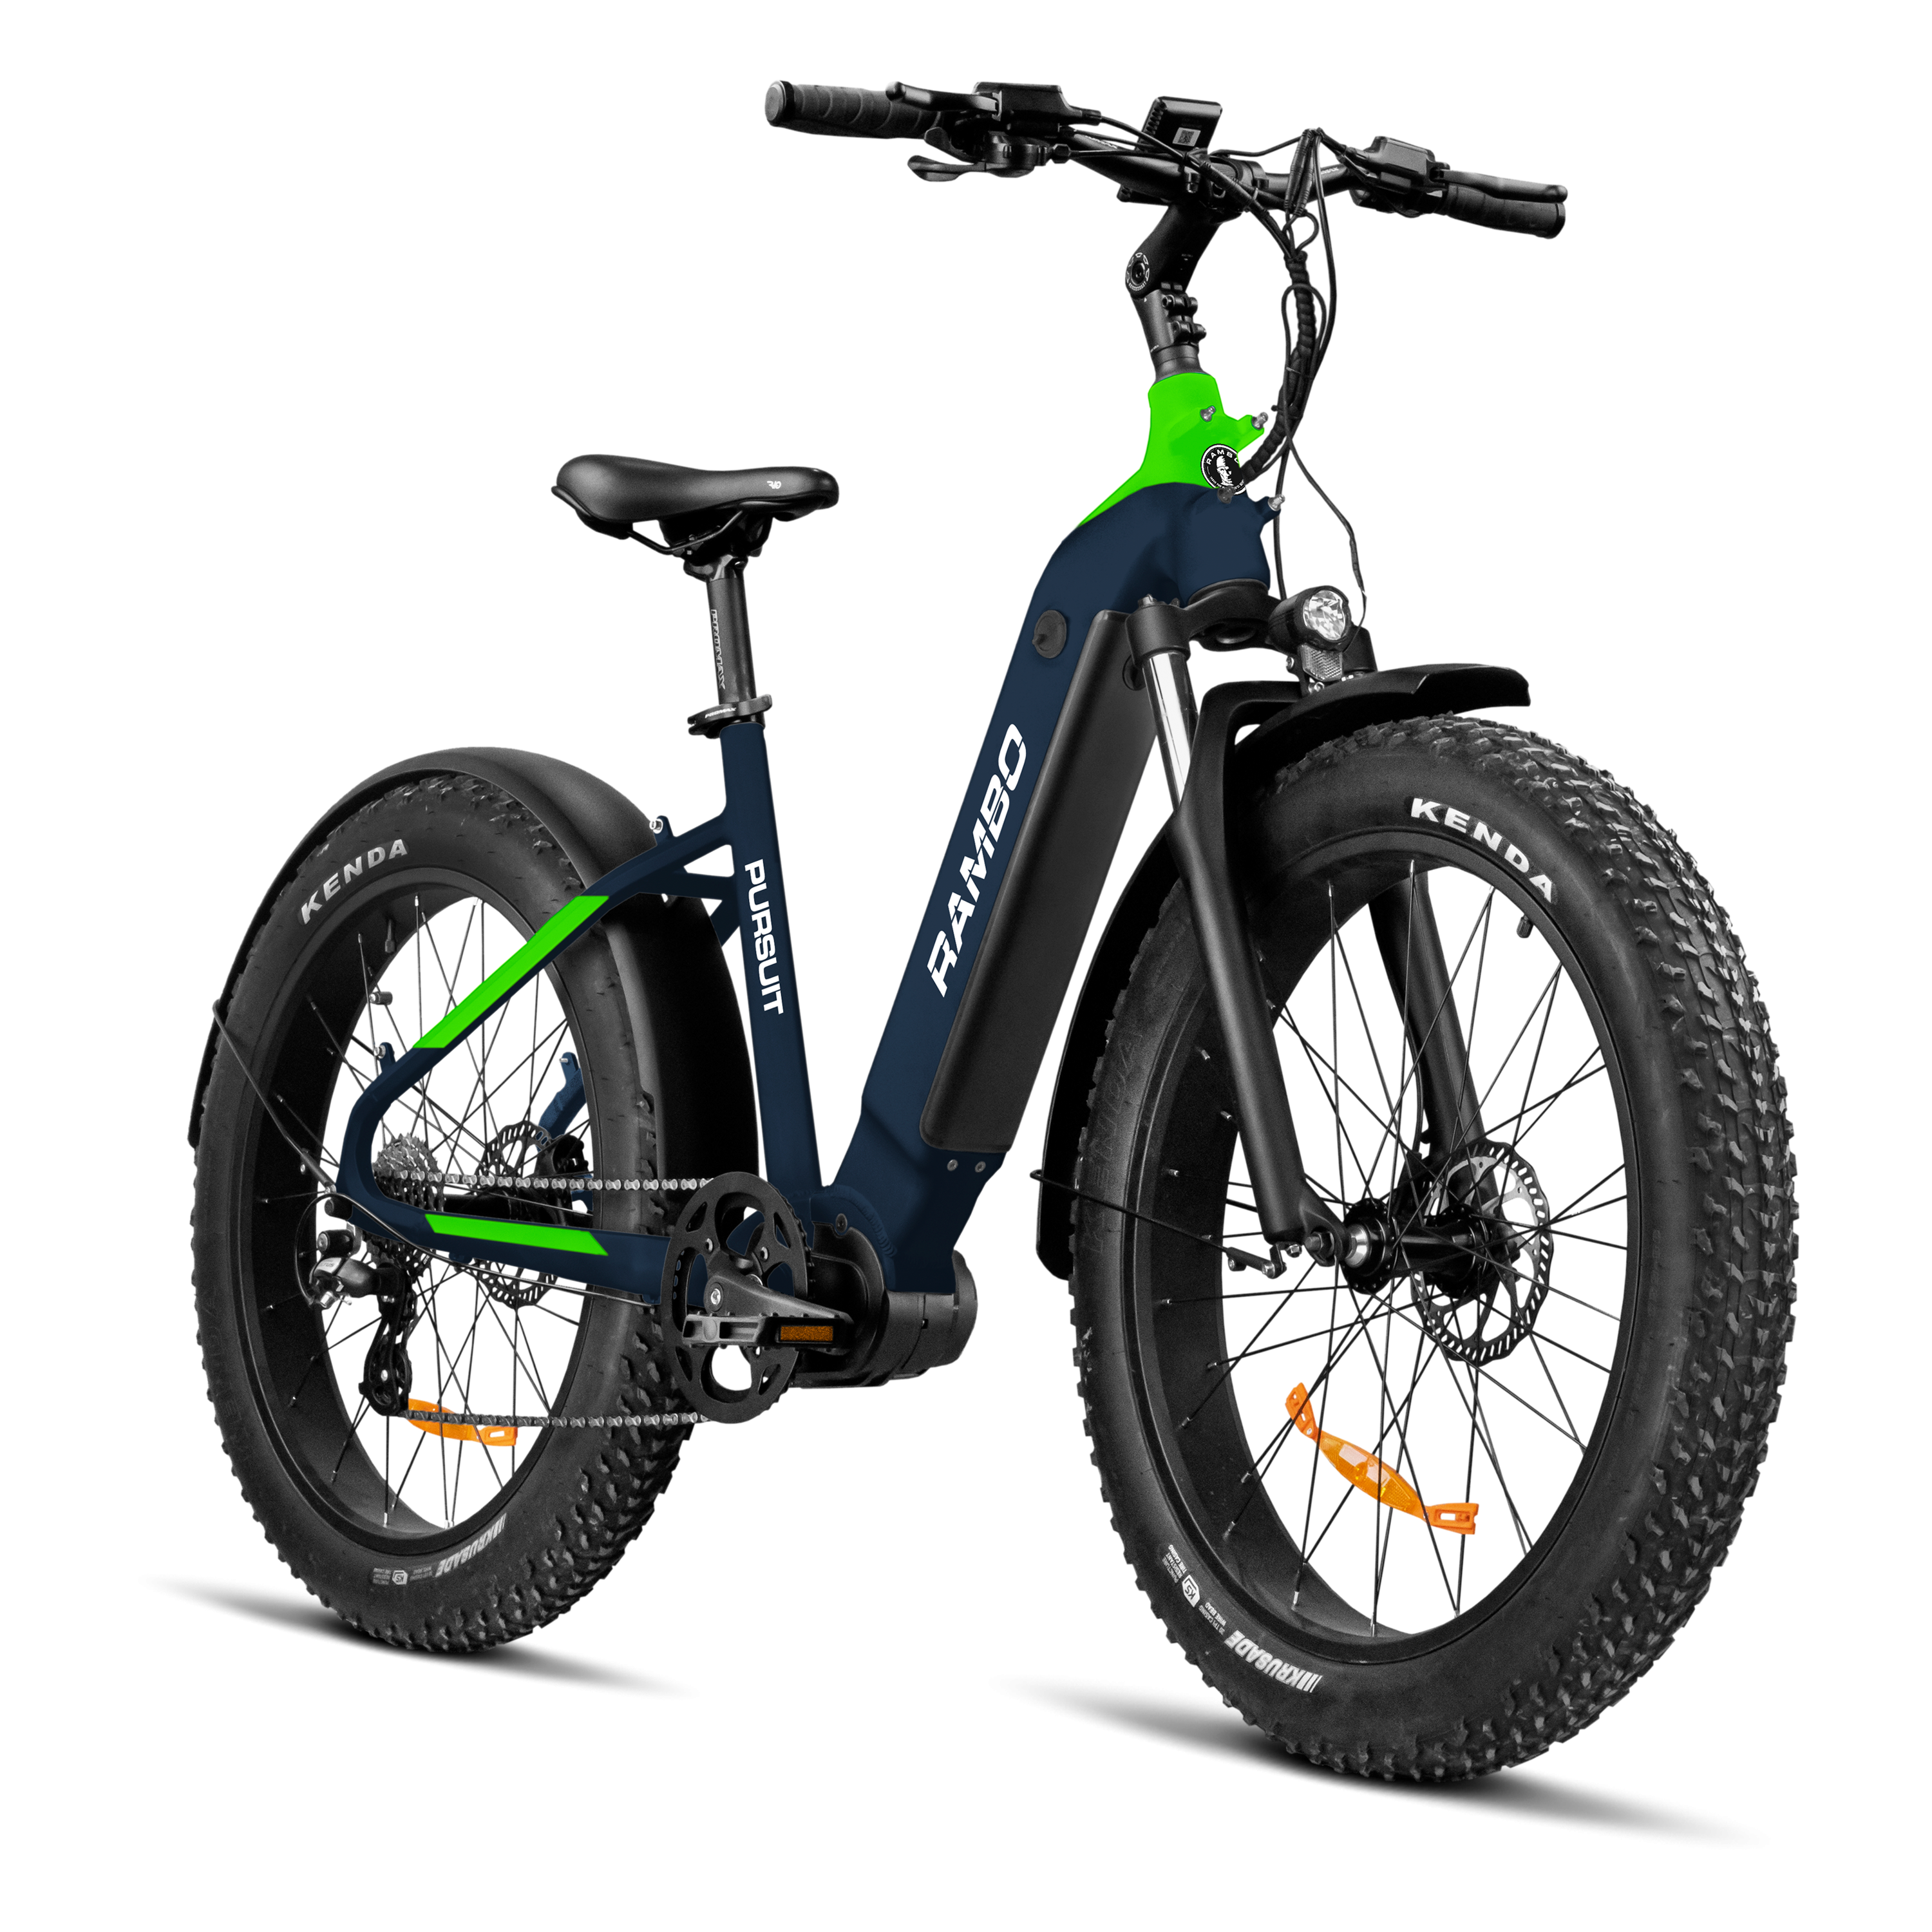 A front/side shot of The Pursuit electric bike, in navy blue and neon green.